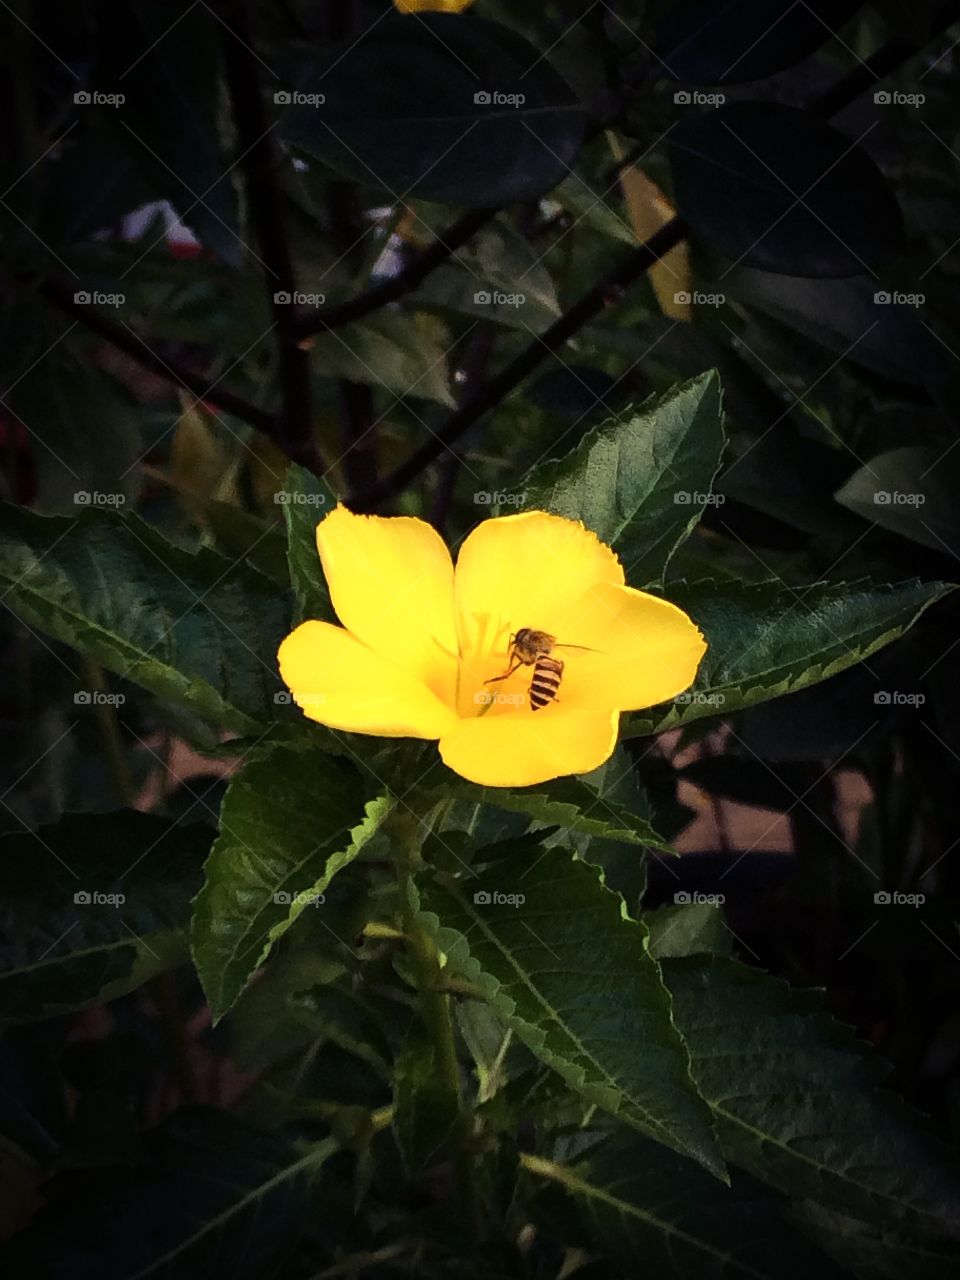 A bee on yellow flower